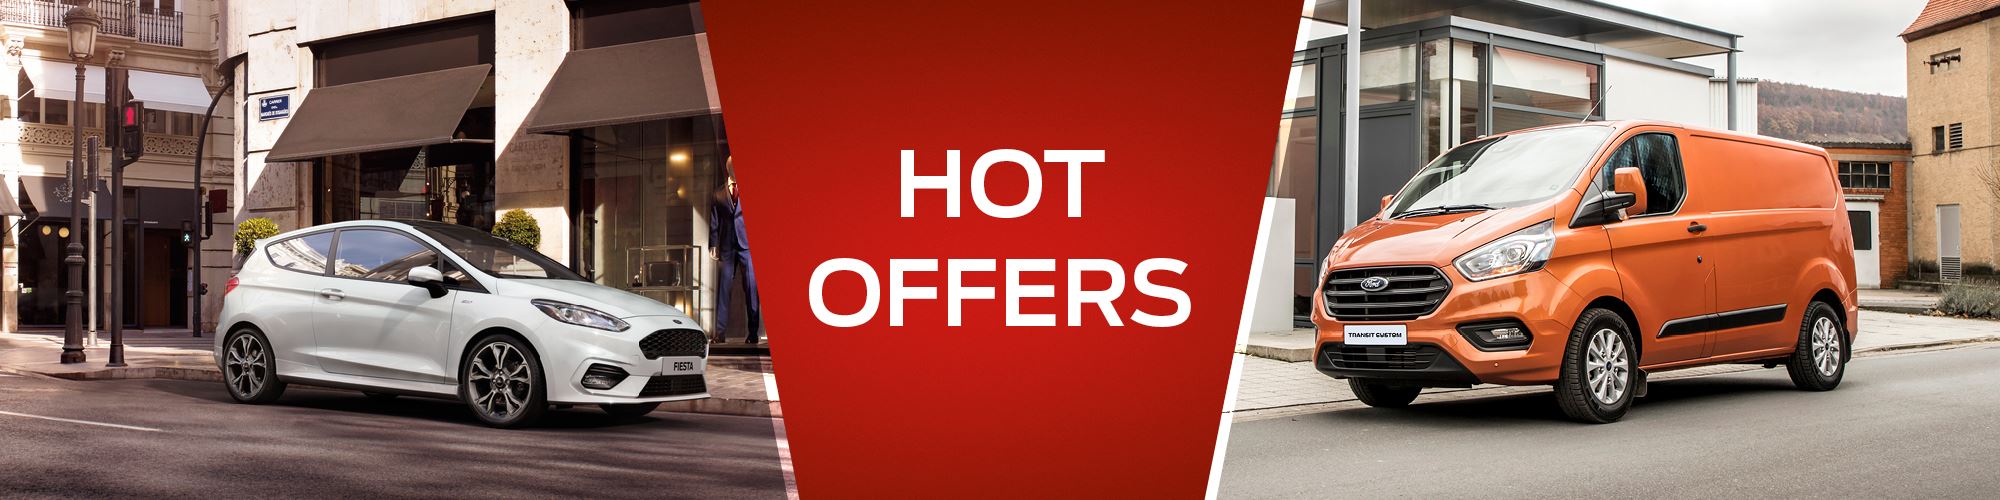 TrustFord Hot Offers